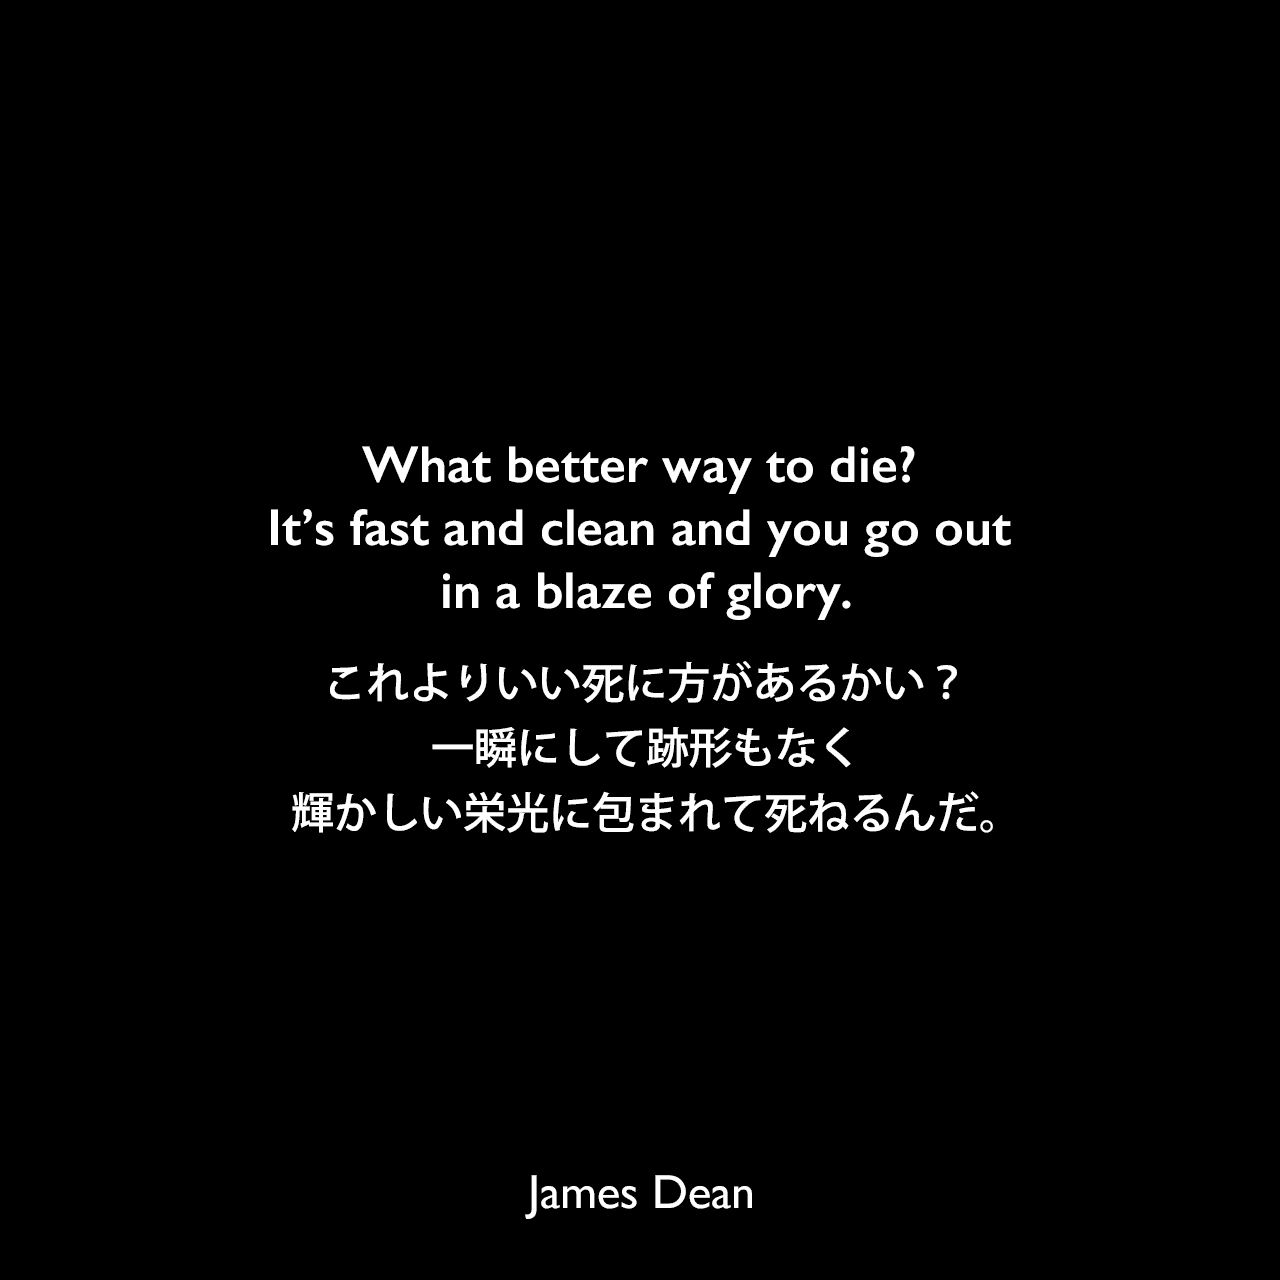 What better way to die? It’s fast and clean and you go out in a blaze of glory.これよりいい死に方があるかい？一瞬にして跡形もなく、輝かしい栄光に包まれて死ねるんだ。James Dean